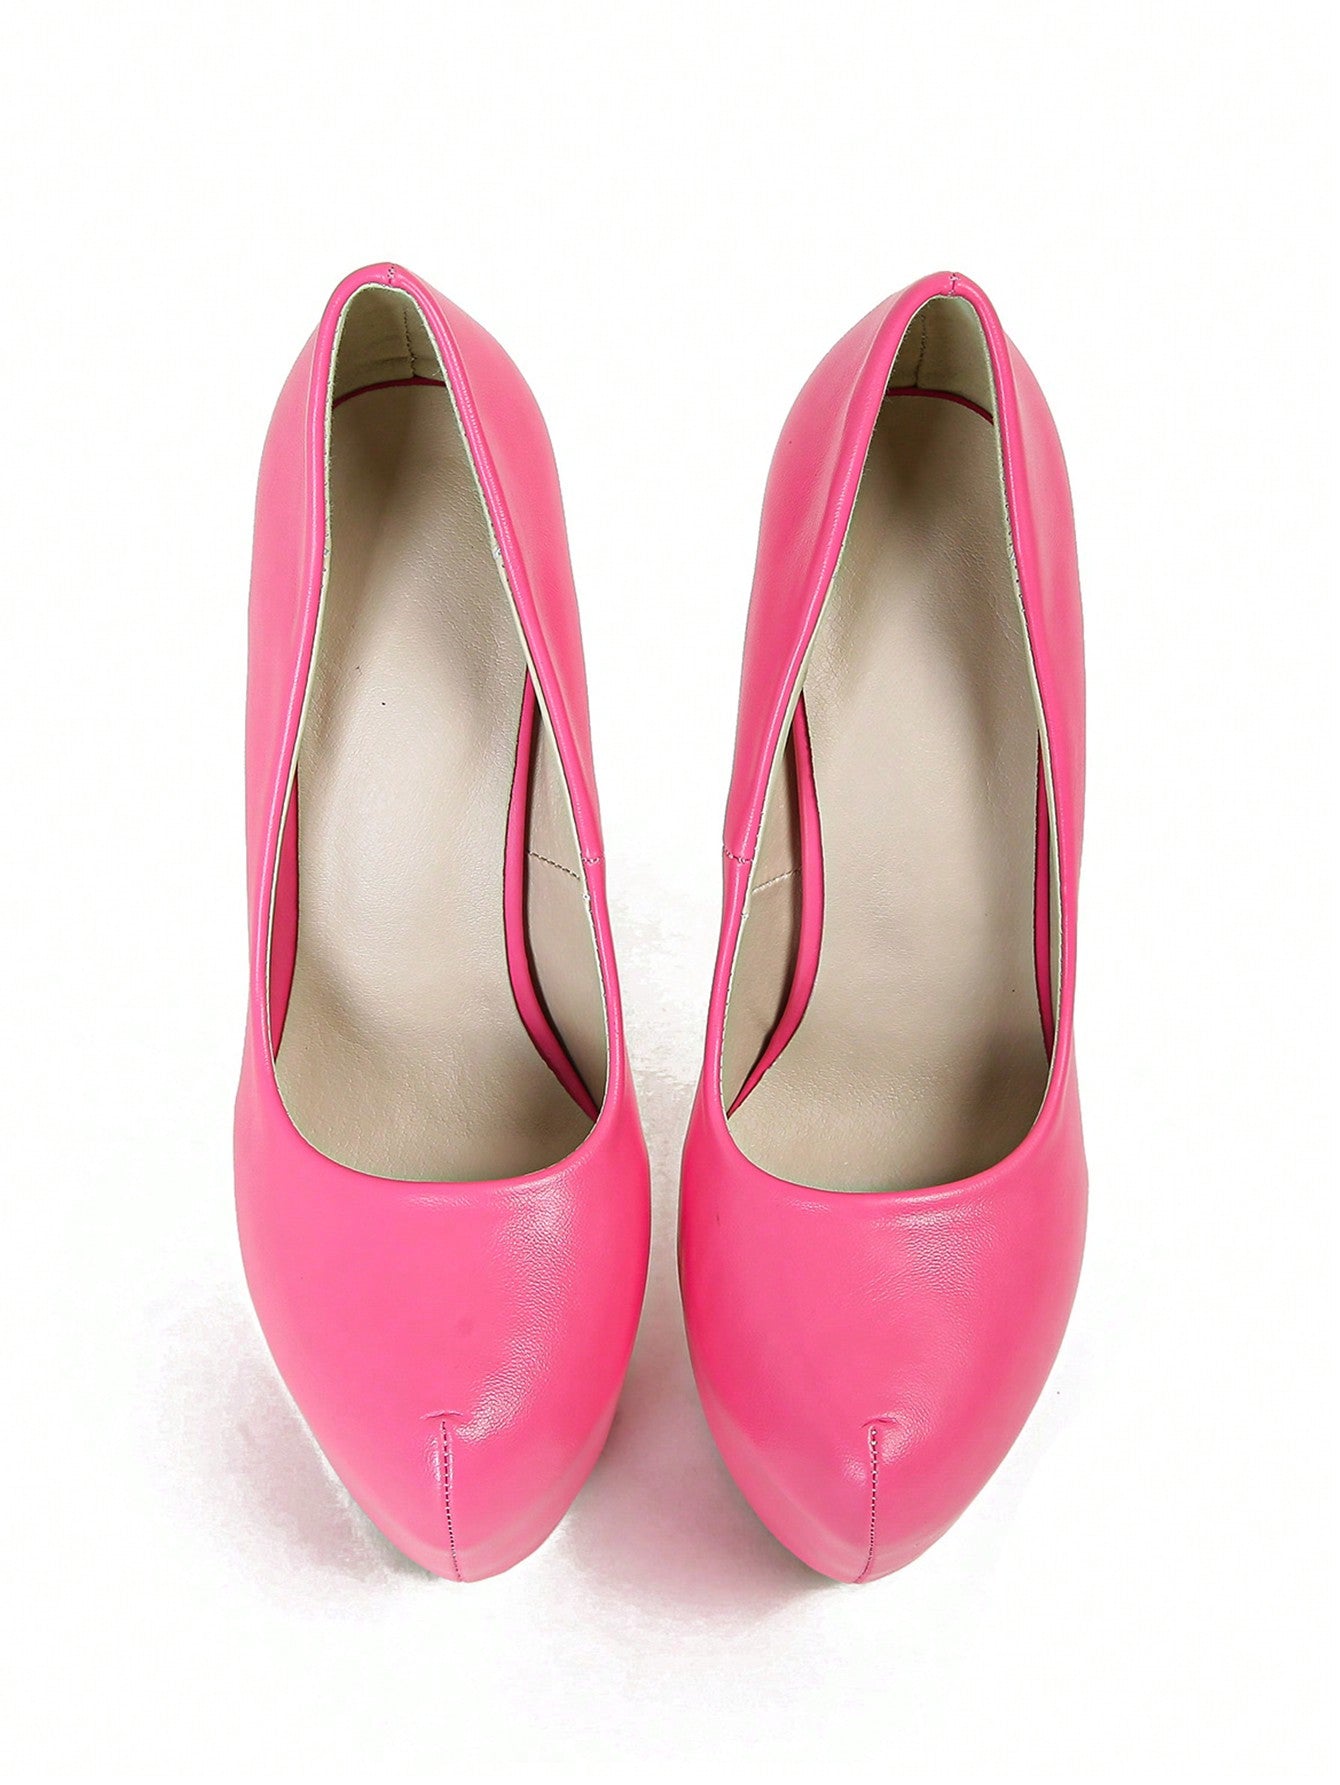 16cm Nightclub Sexy High Heel Shoes For Women, Perfect For Parties And Banquets, 34-45 Size-Pink-2